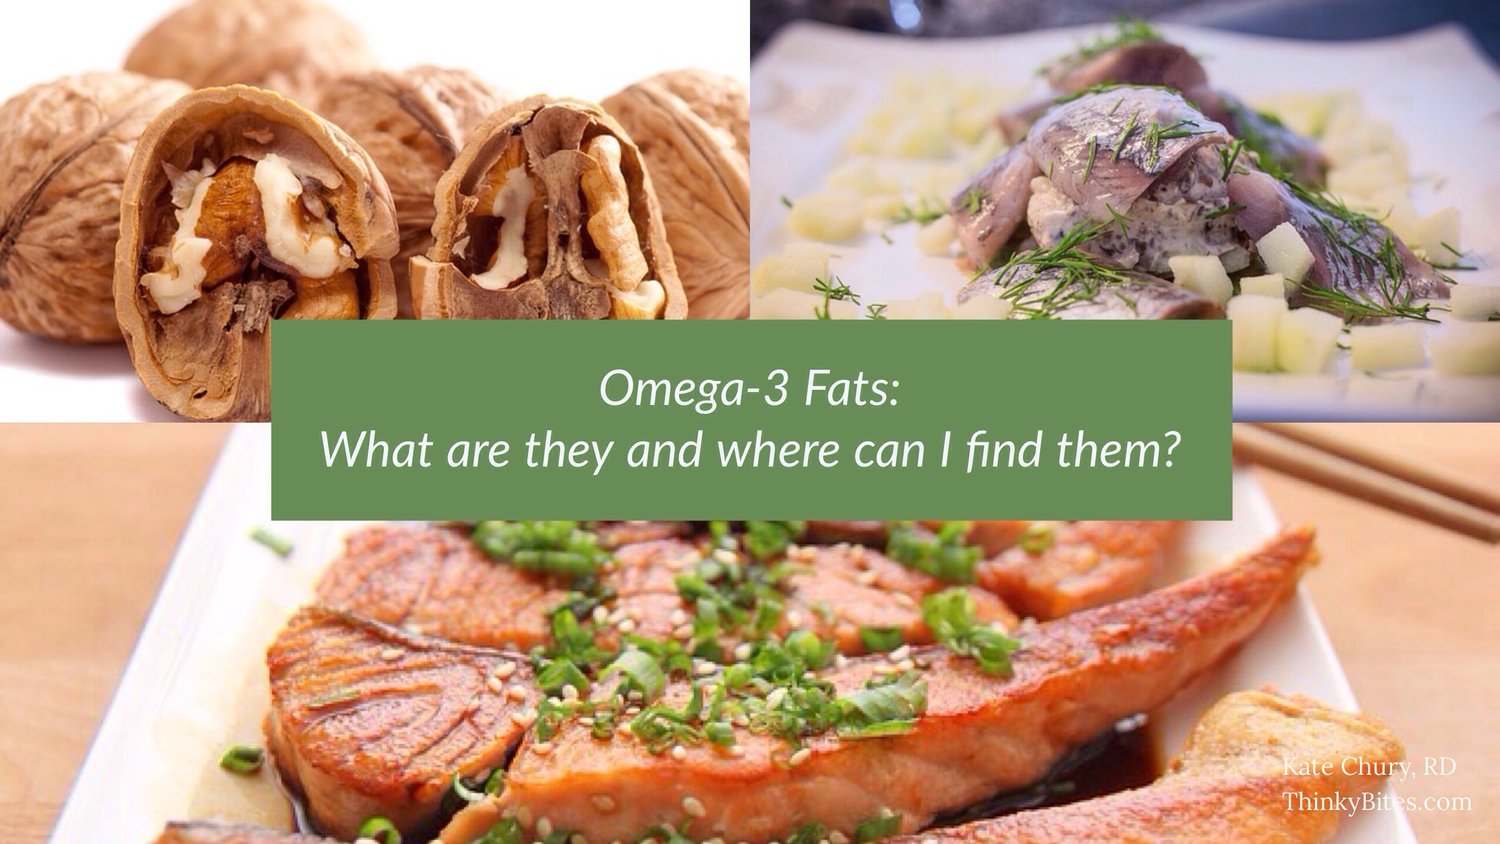 Omega-3 Fats: What are they and where can I find them?